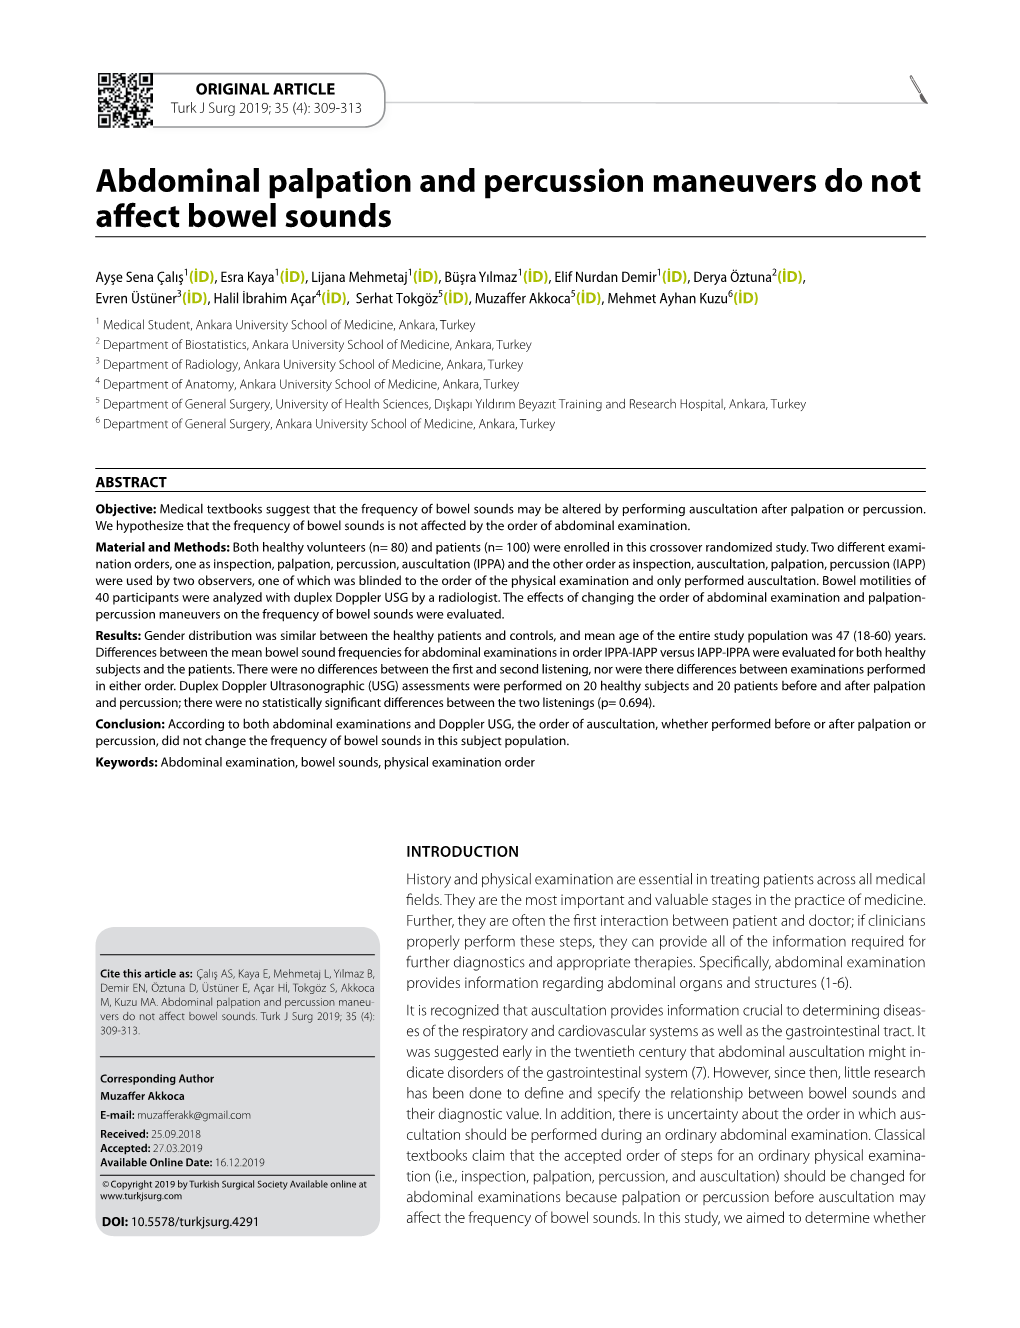 Abdominal Palpation and Percussion Maneuvers Do Not Affect Bowel Sounds